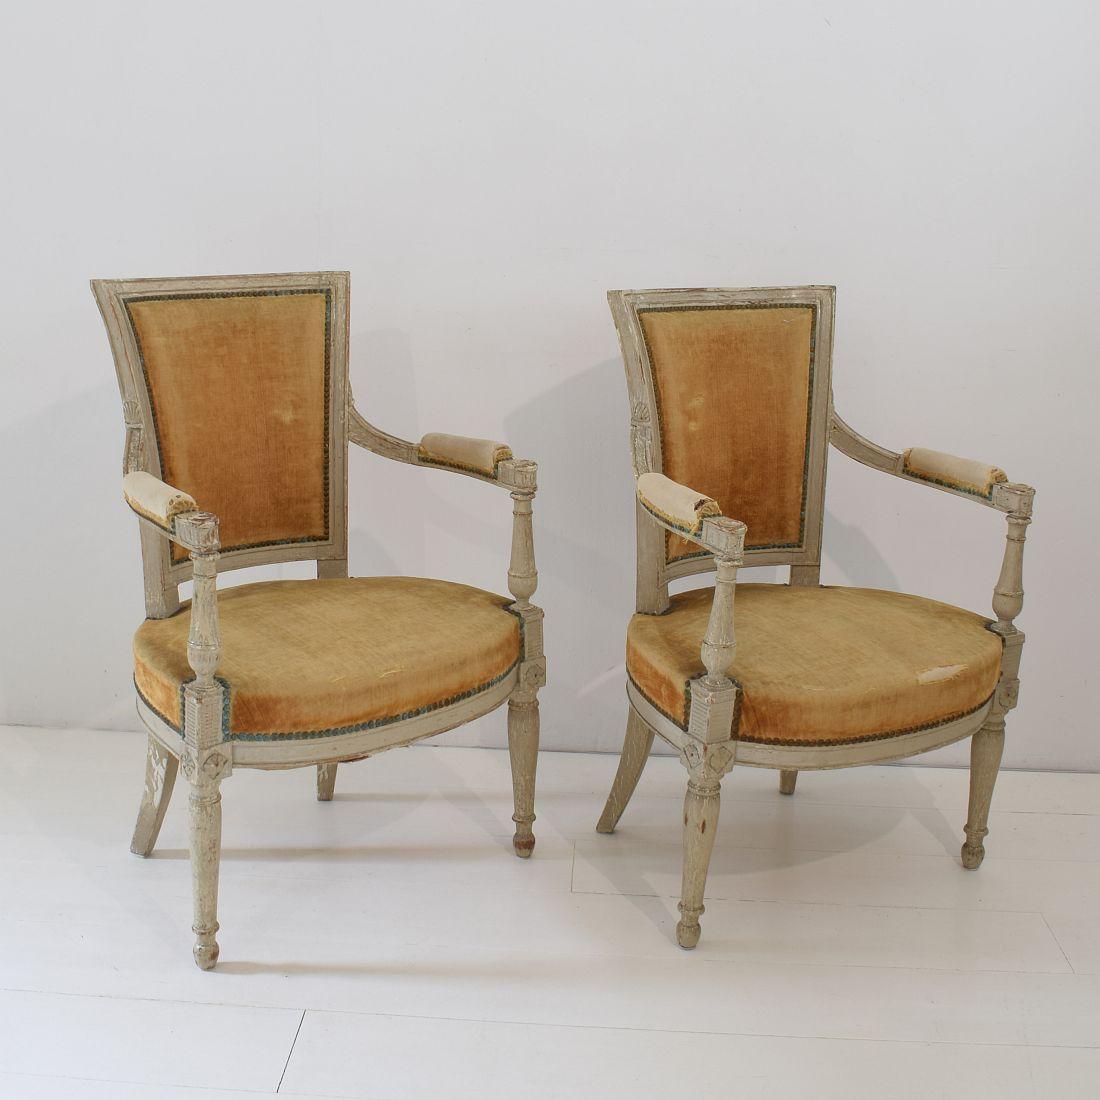 Hand-Crafted 18th Century French Pair of Directoire Chairs